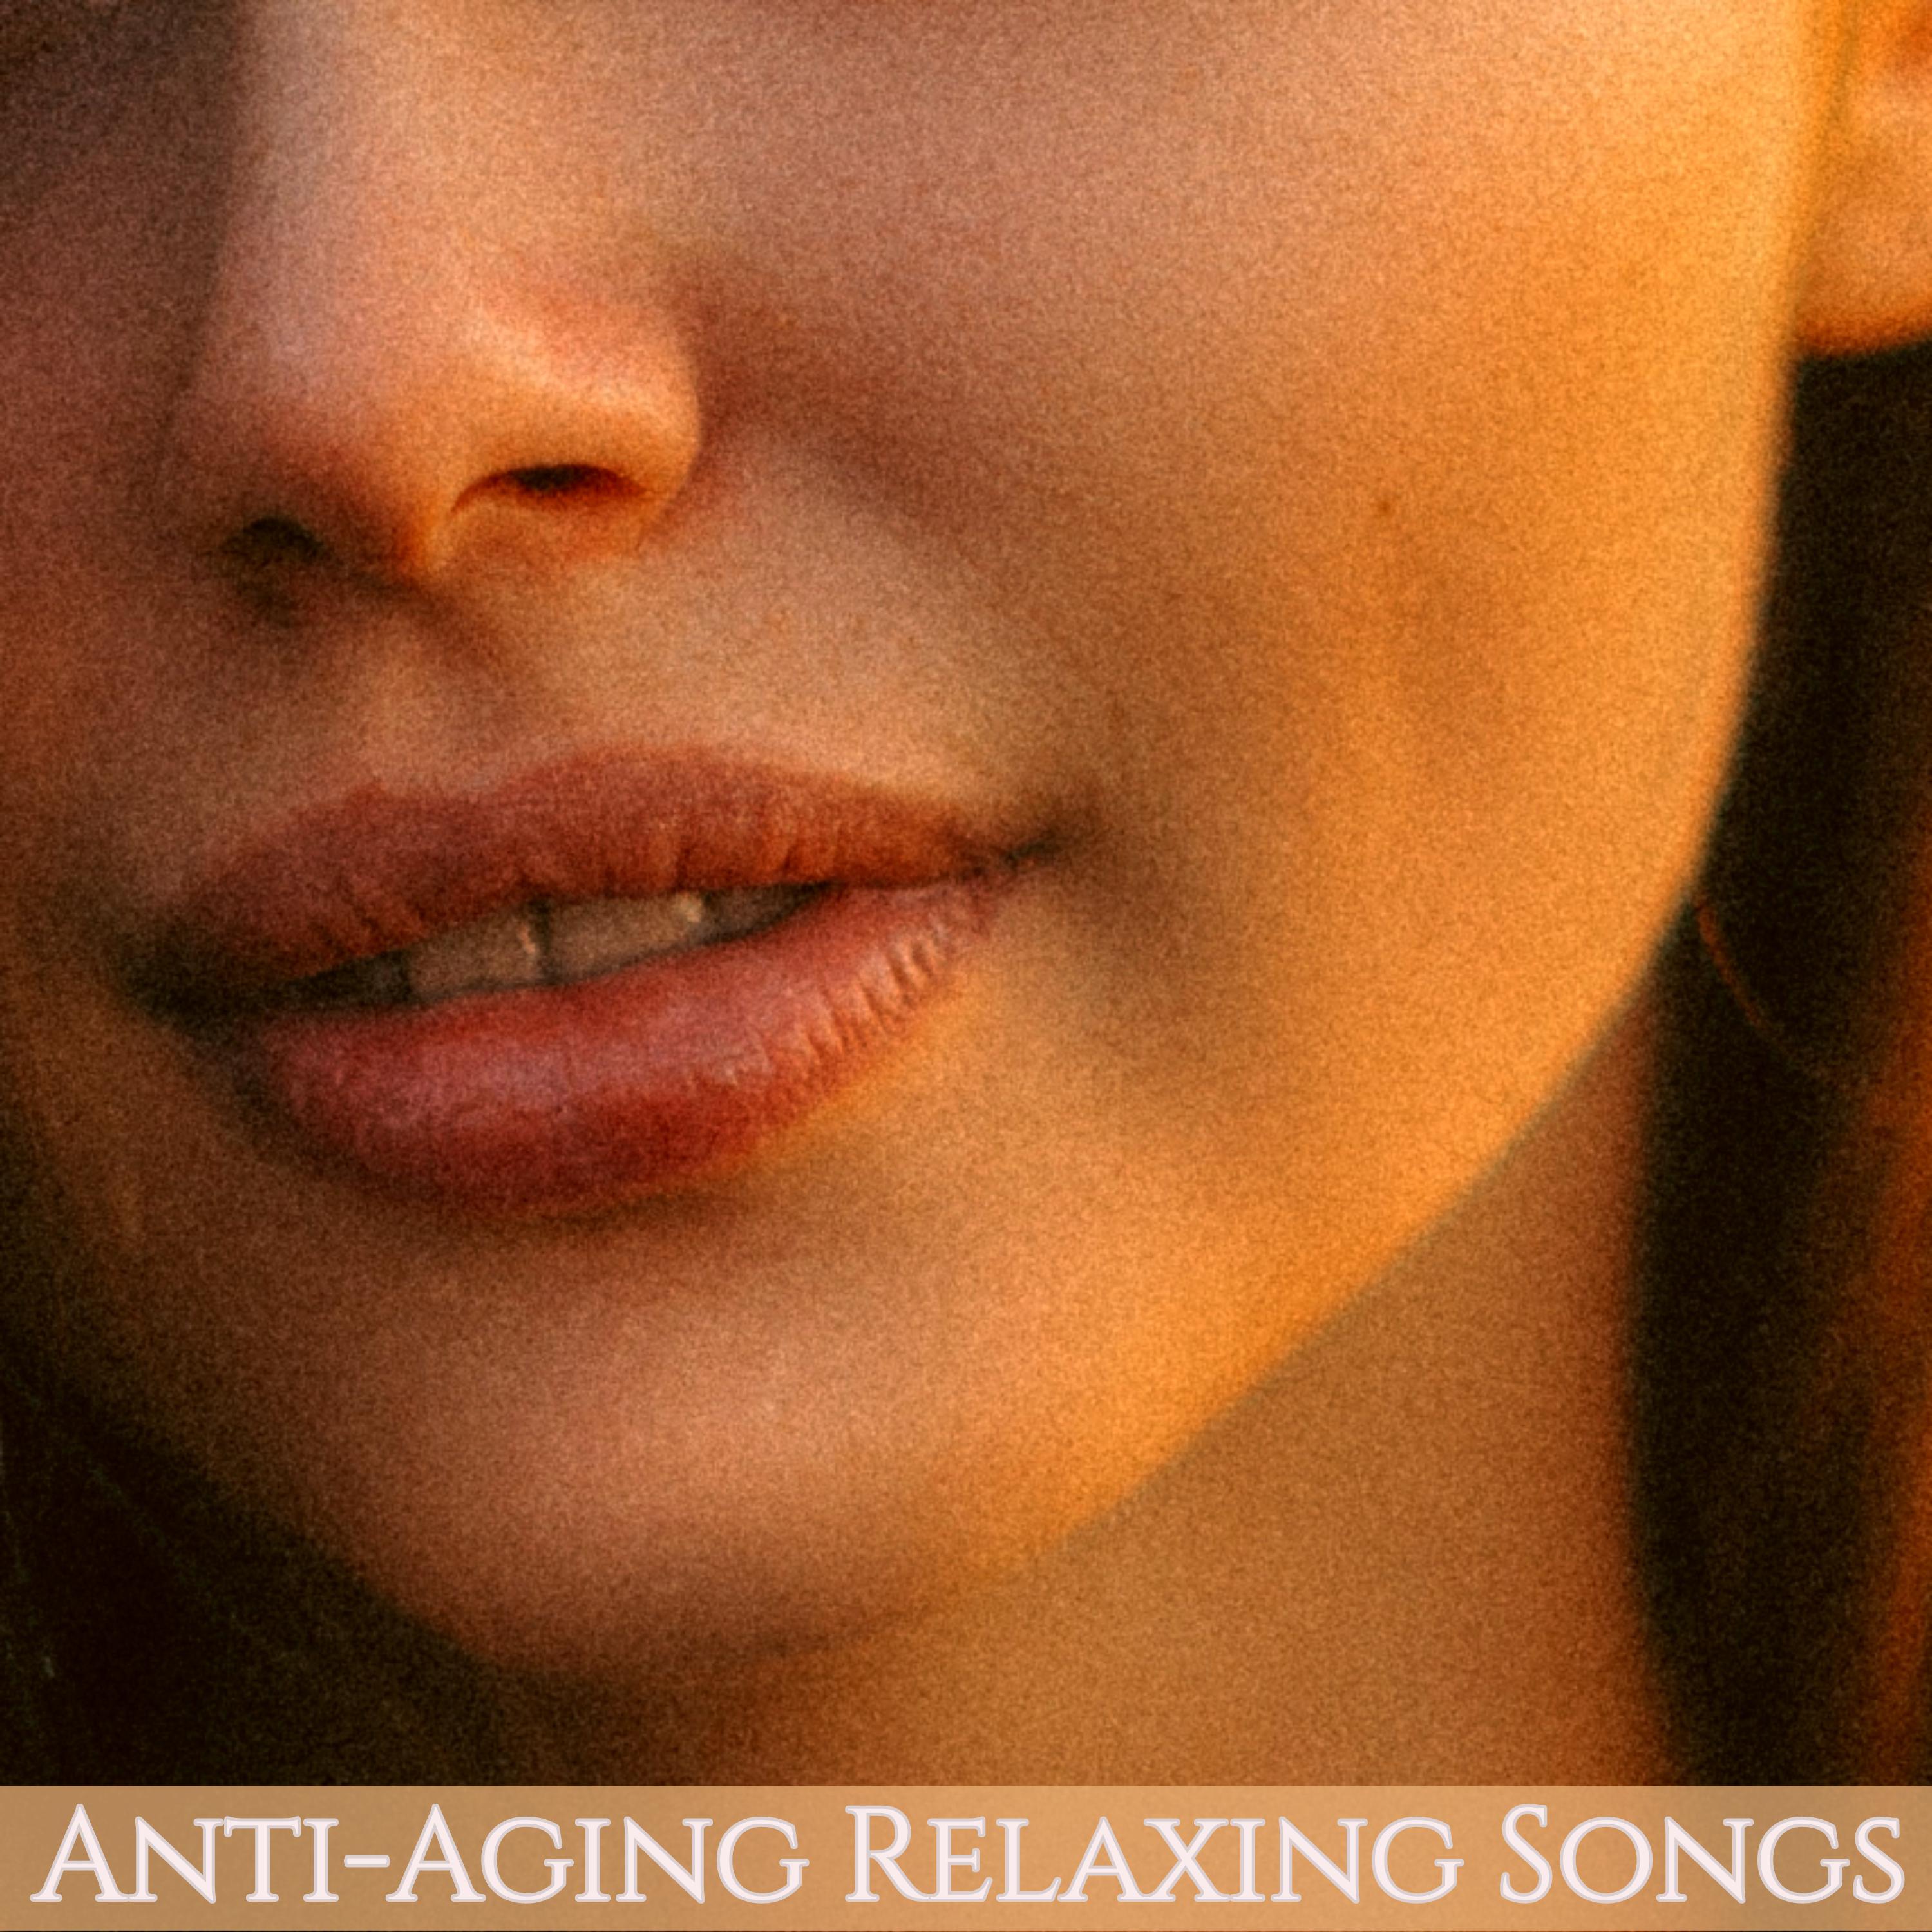 AntiAging Relaxing Songs  Best Relaxing Music and Soothing Sounds to Destress  Relax Your Gaze and Your Jaw